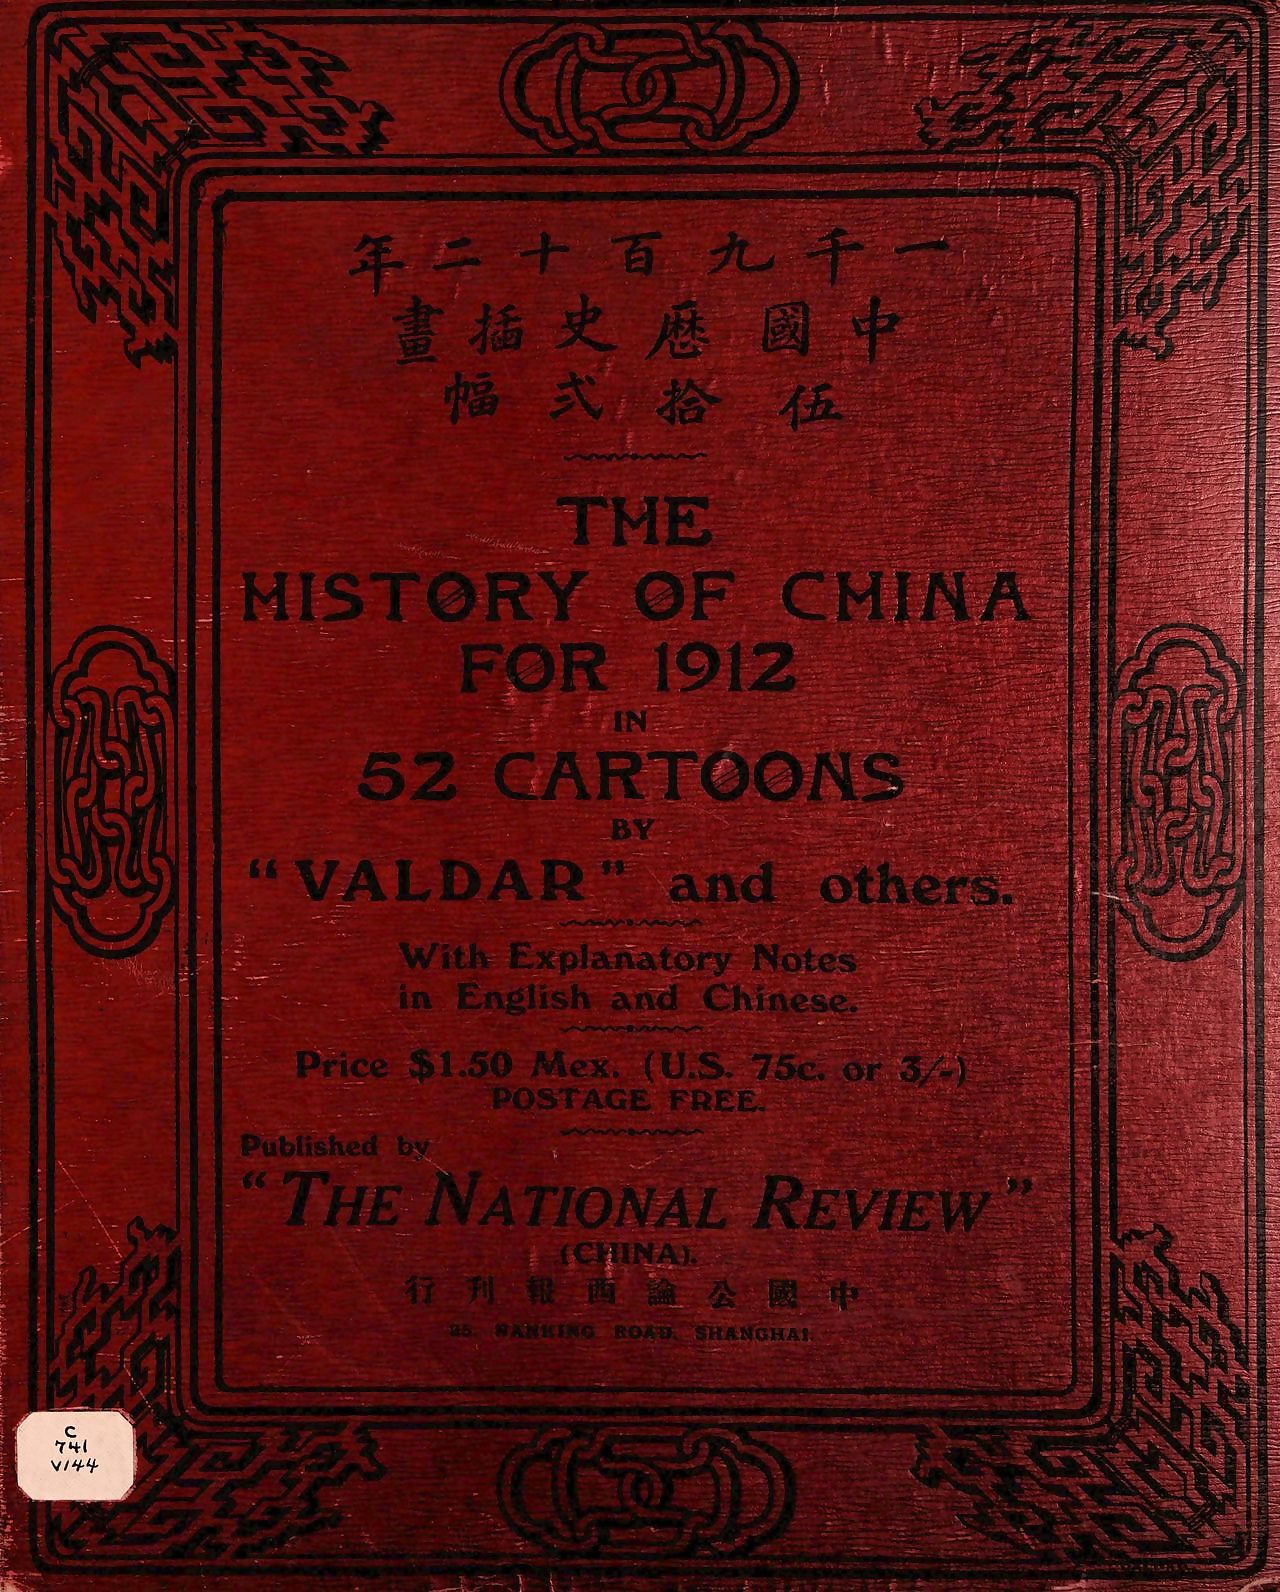 Be passed on Interest be beneficial to One of a pair Be worthwhile for 1912 approximately 52 Cartoons - 一千九百十二年中国历史插画五十二幅